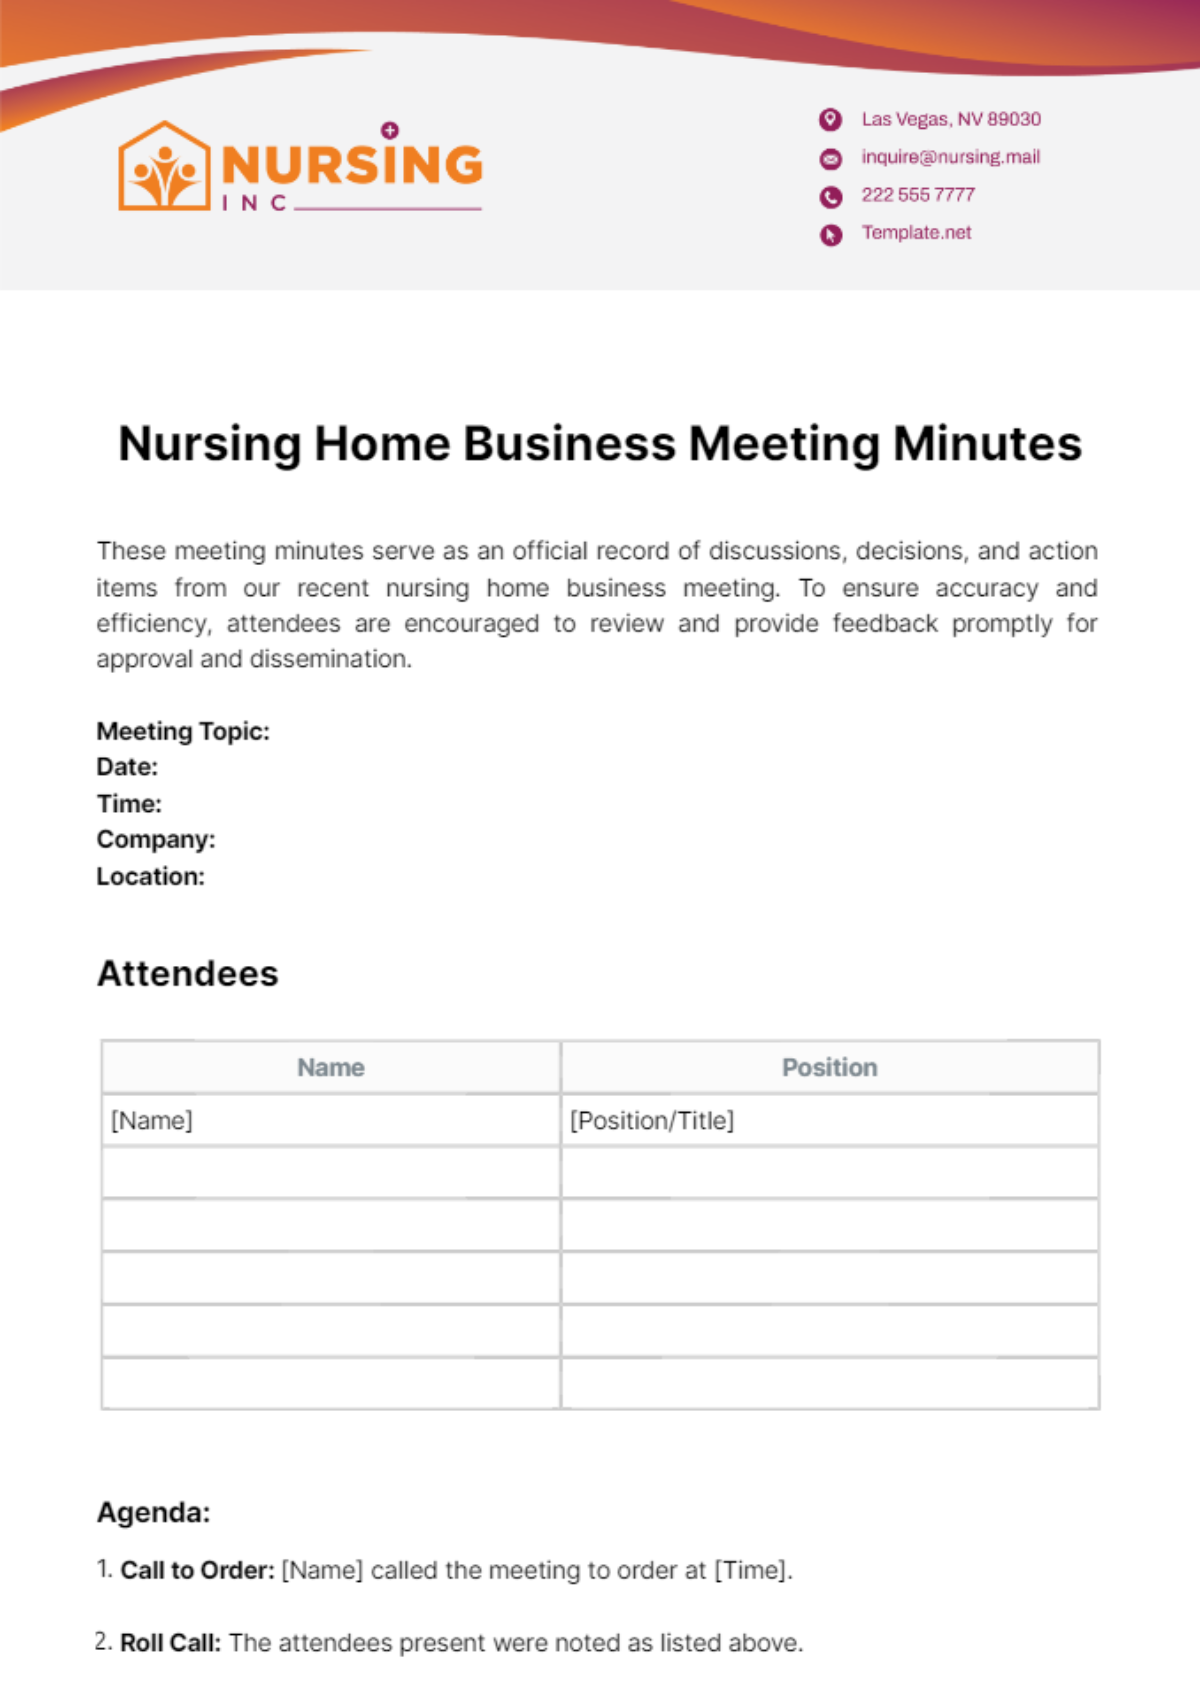 Nursing Home Business Meeting Minutes Template